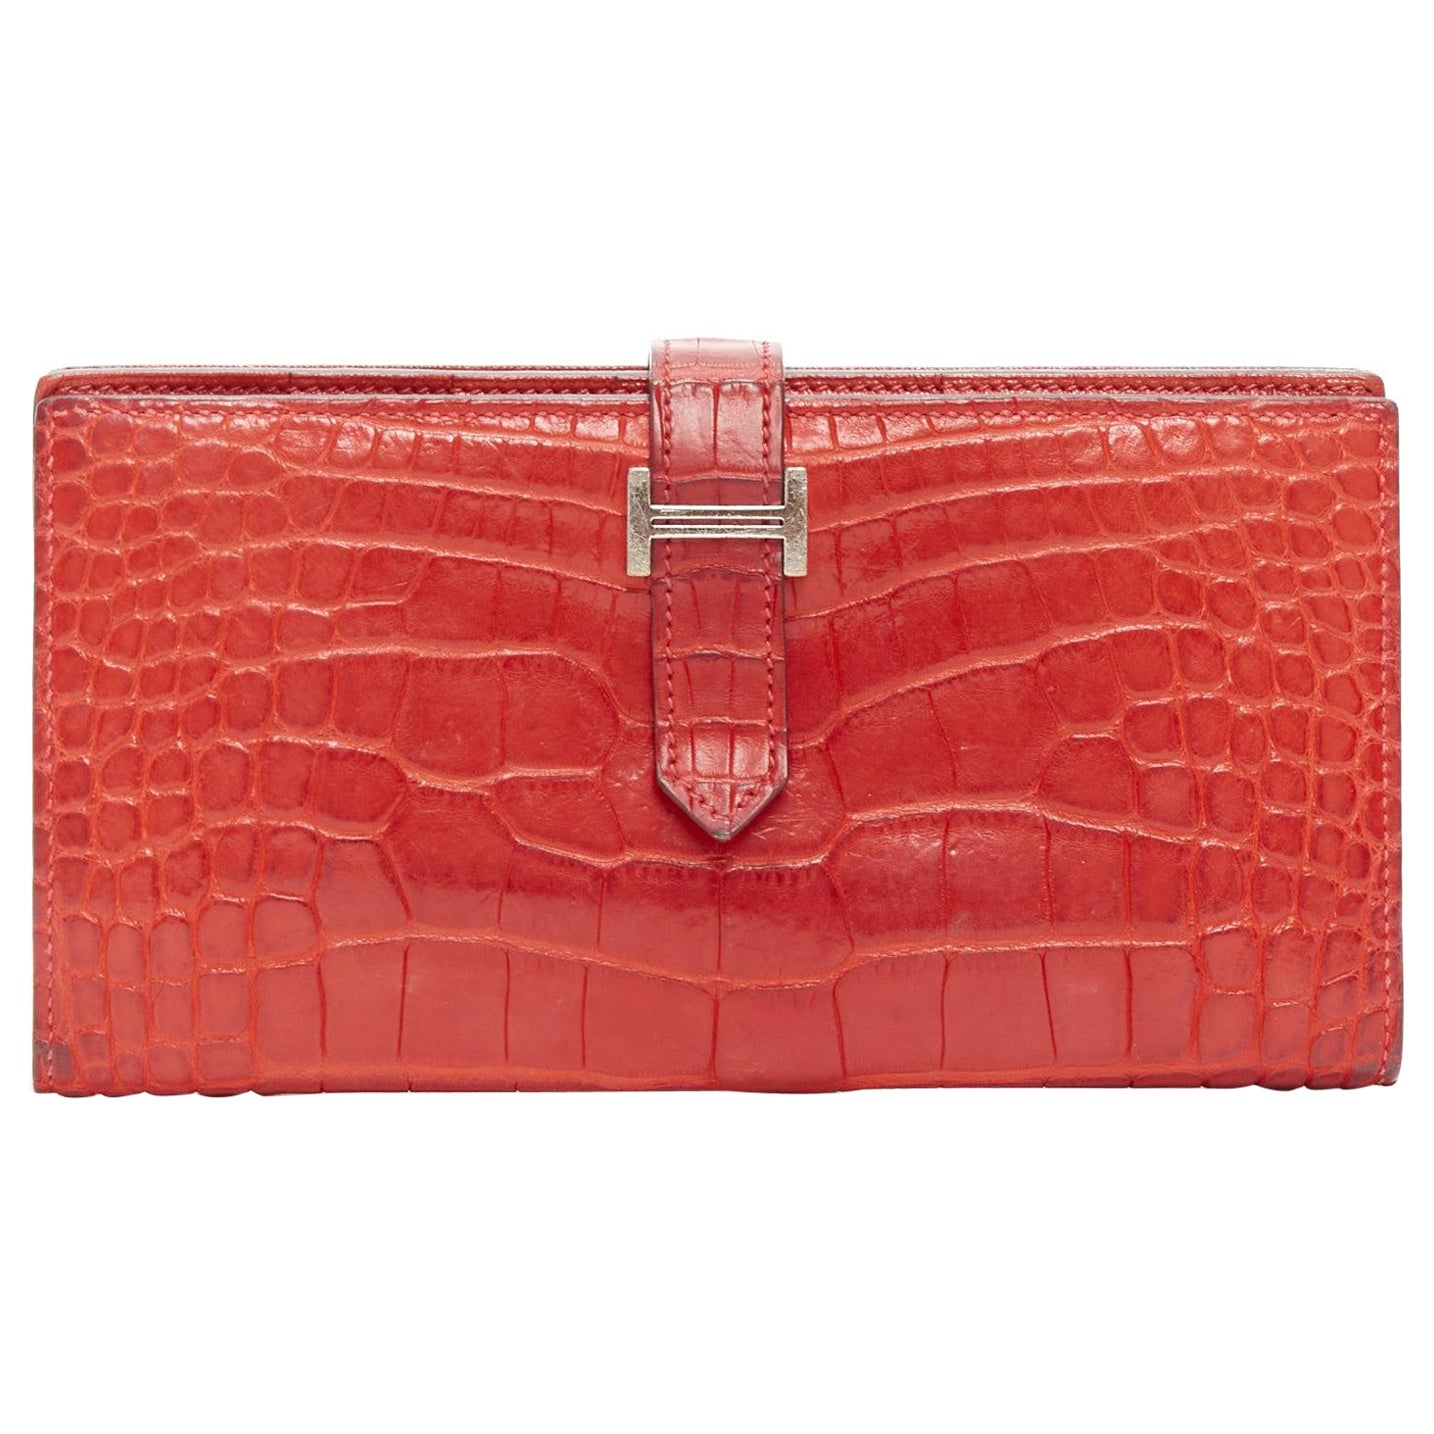 HERMES Bearne red scaled leather silver H logo long wallet For Sale